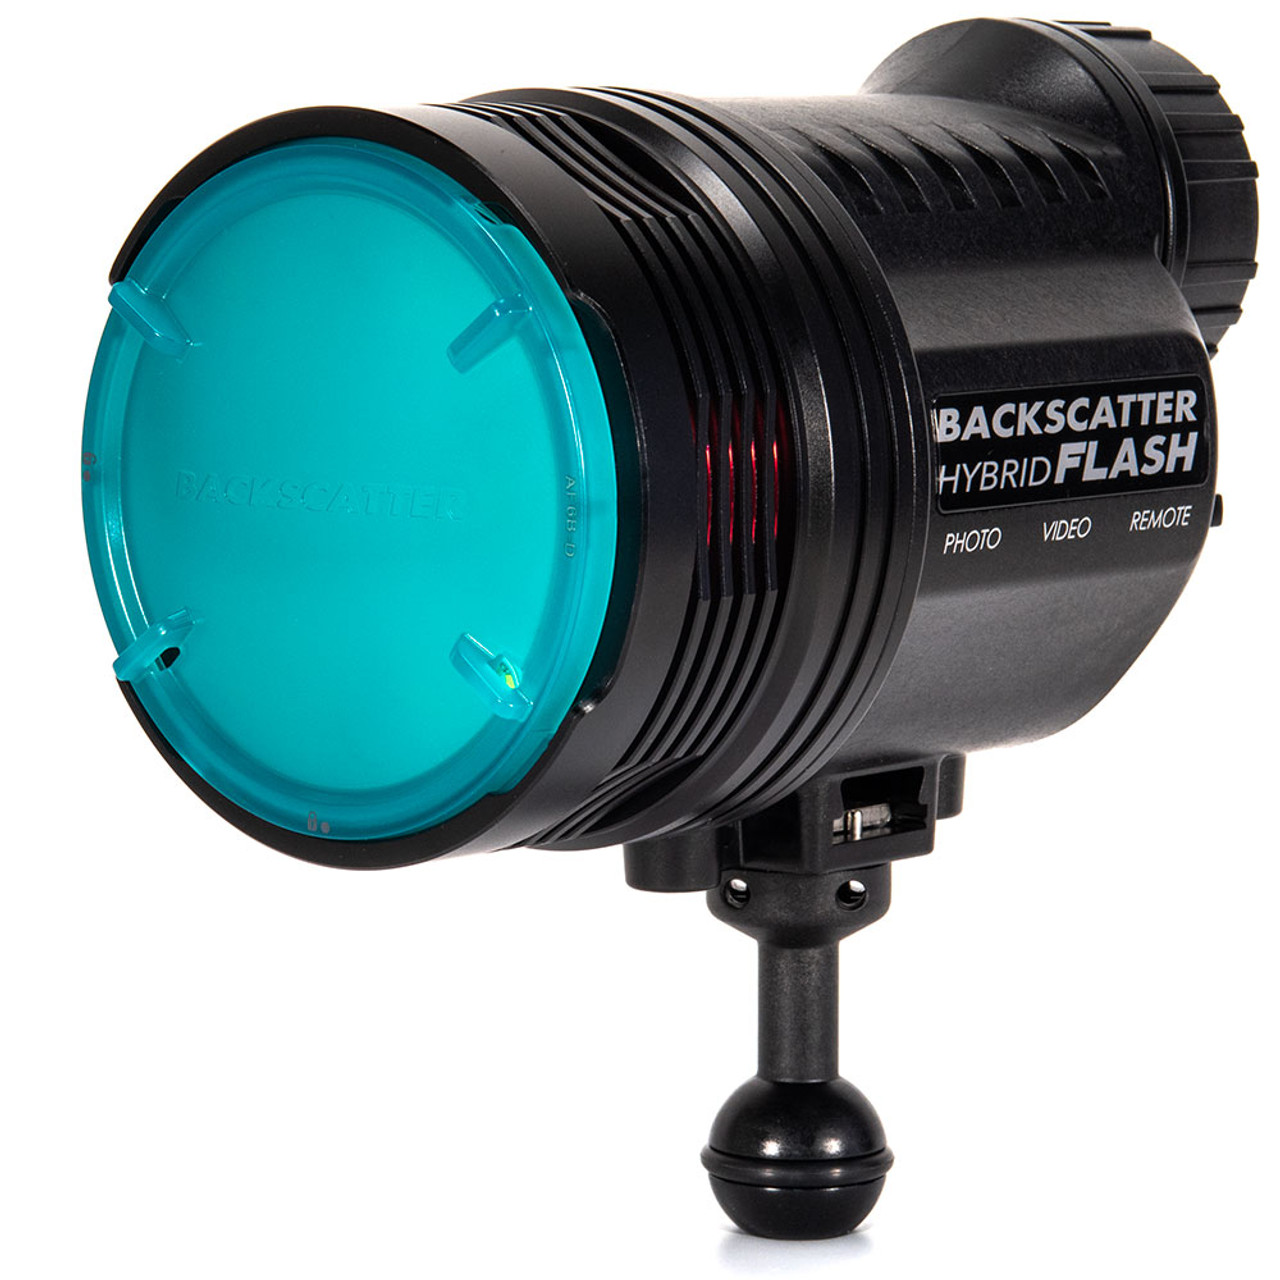 Backscatter Ambient Blue Flat Diffuser fitted to the Backscatter Hybrid Flash 1 Underwater Strobe